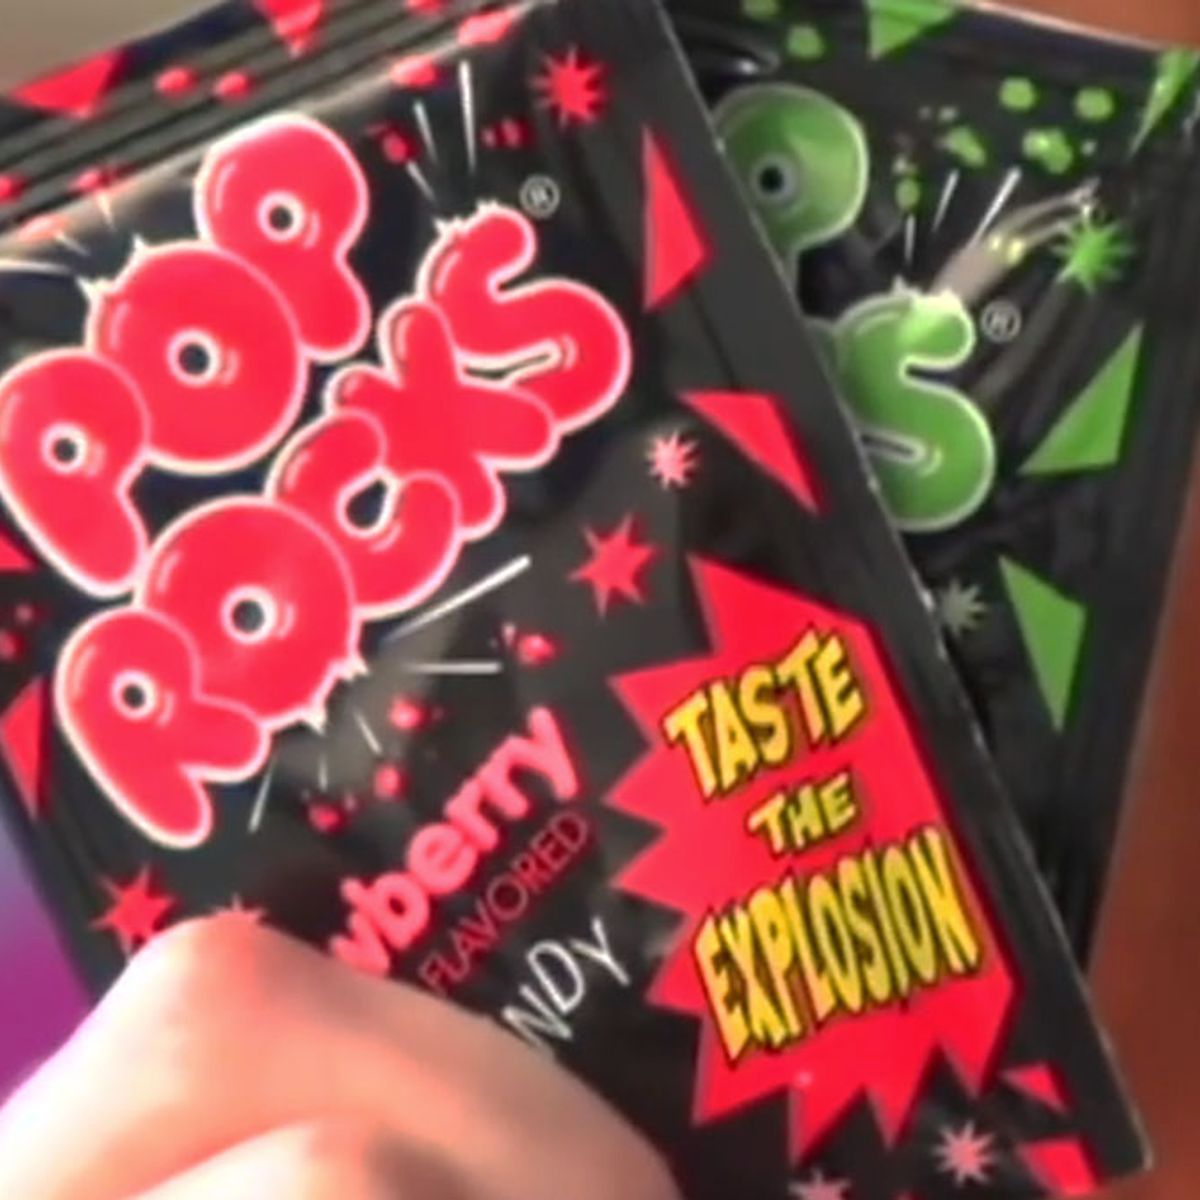 Is This Pop Rocks a Real 'Banned' TV Commercial? | Snopes.com